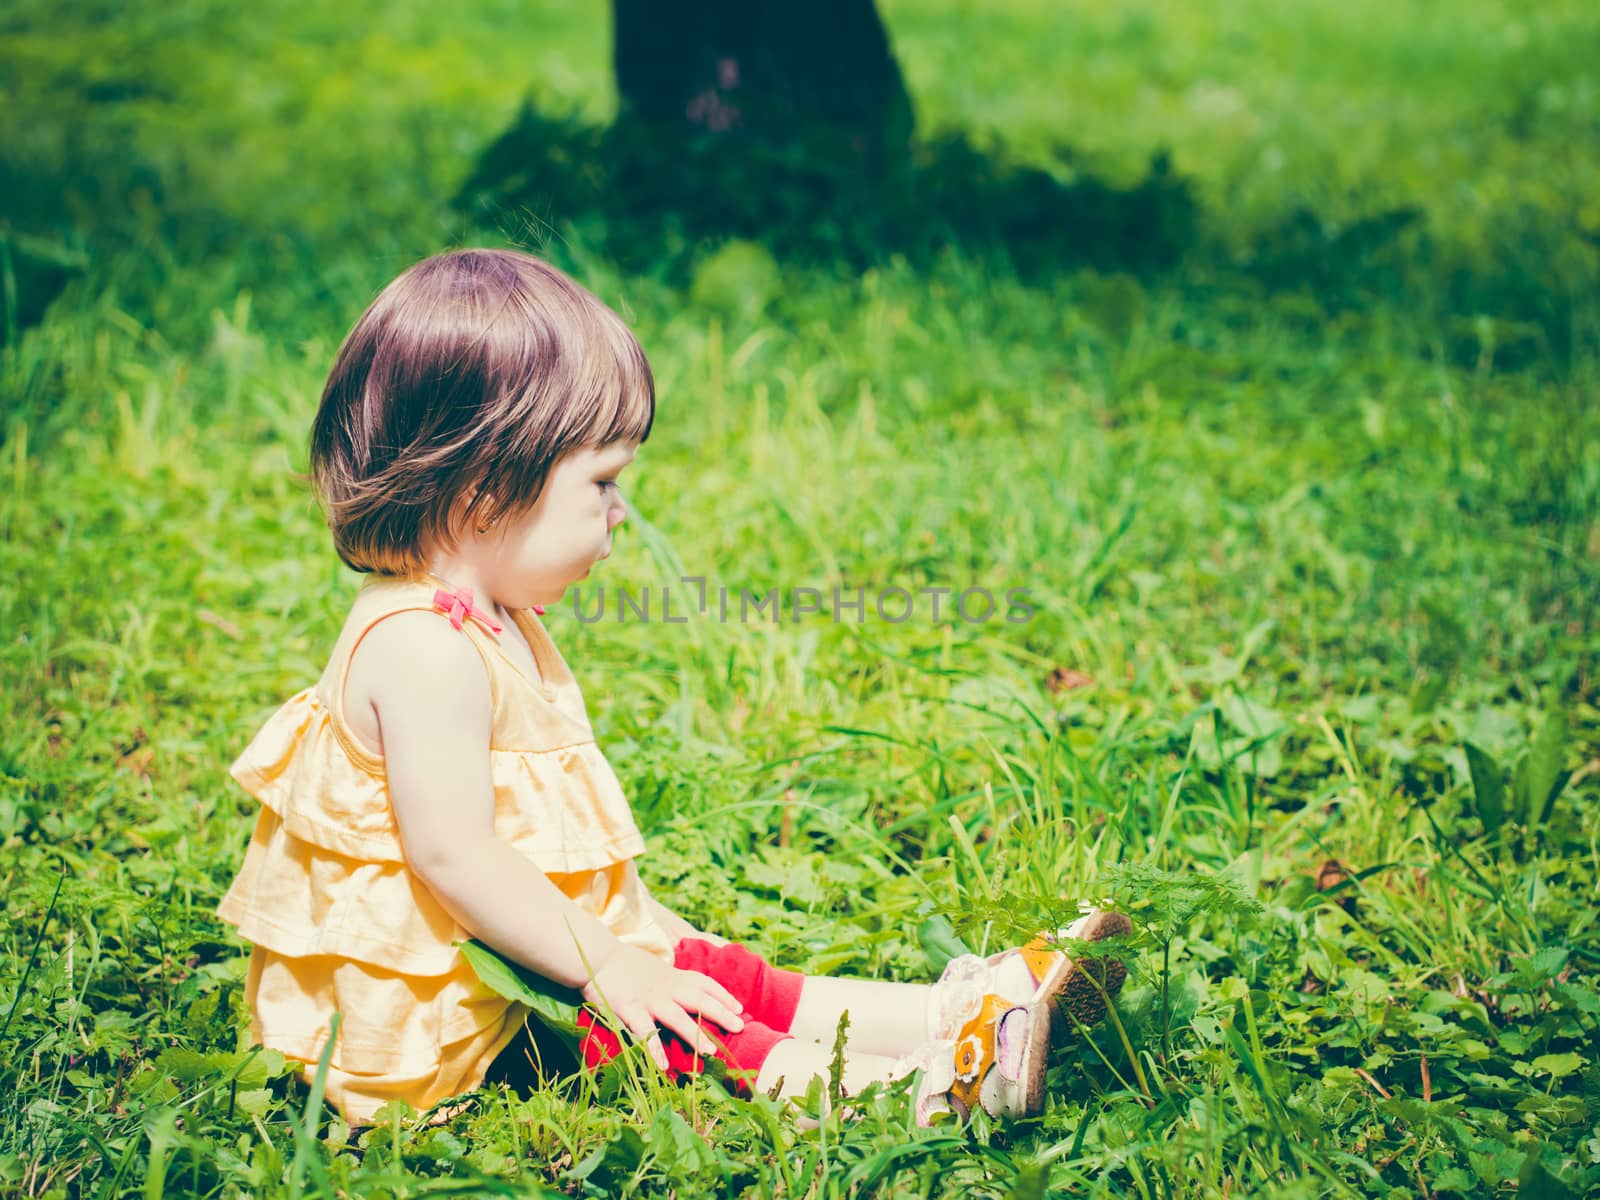 One-year baby girl sitting on grass and looking away